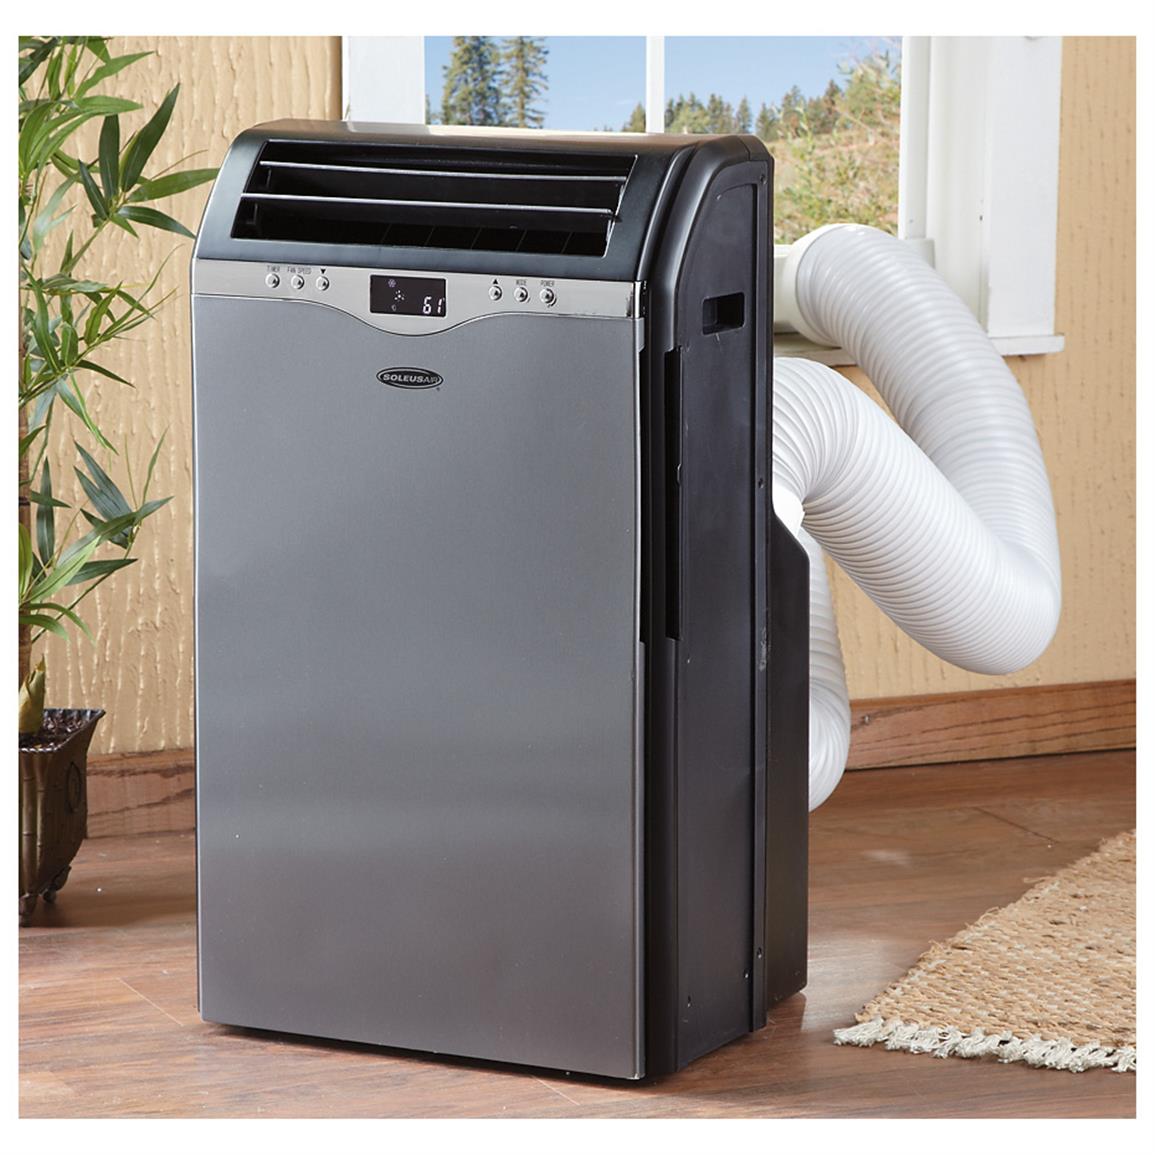 Soleus AirÂ® Portable AC Unit (Refurbished) - 593355, Air Conditioners & Fans at Sportsman's Guide